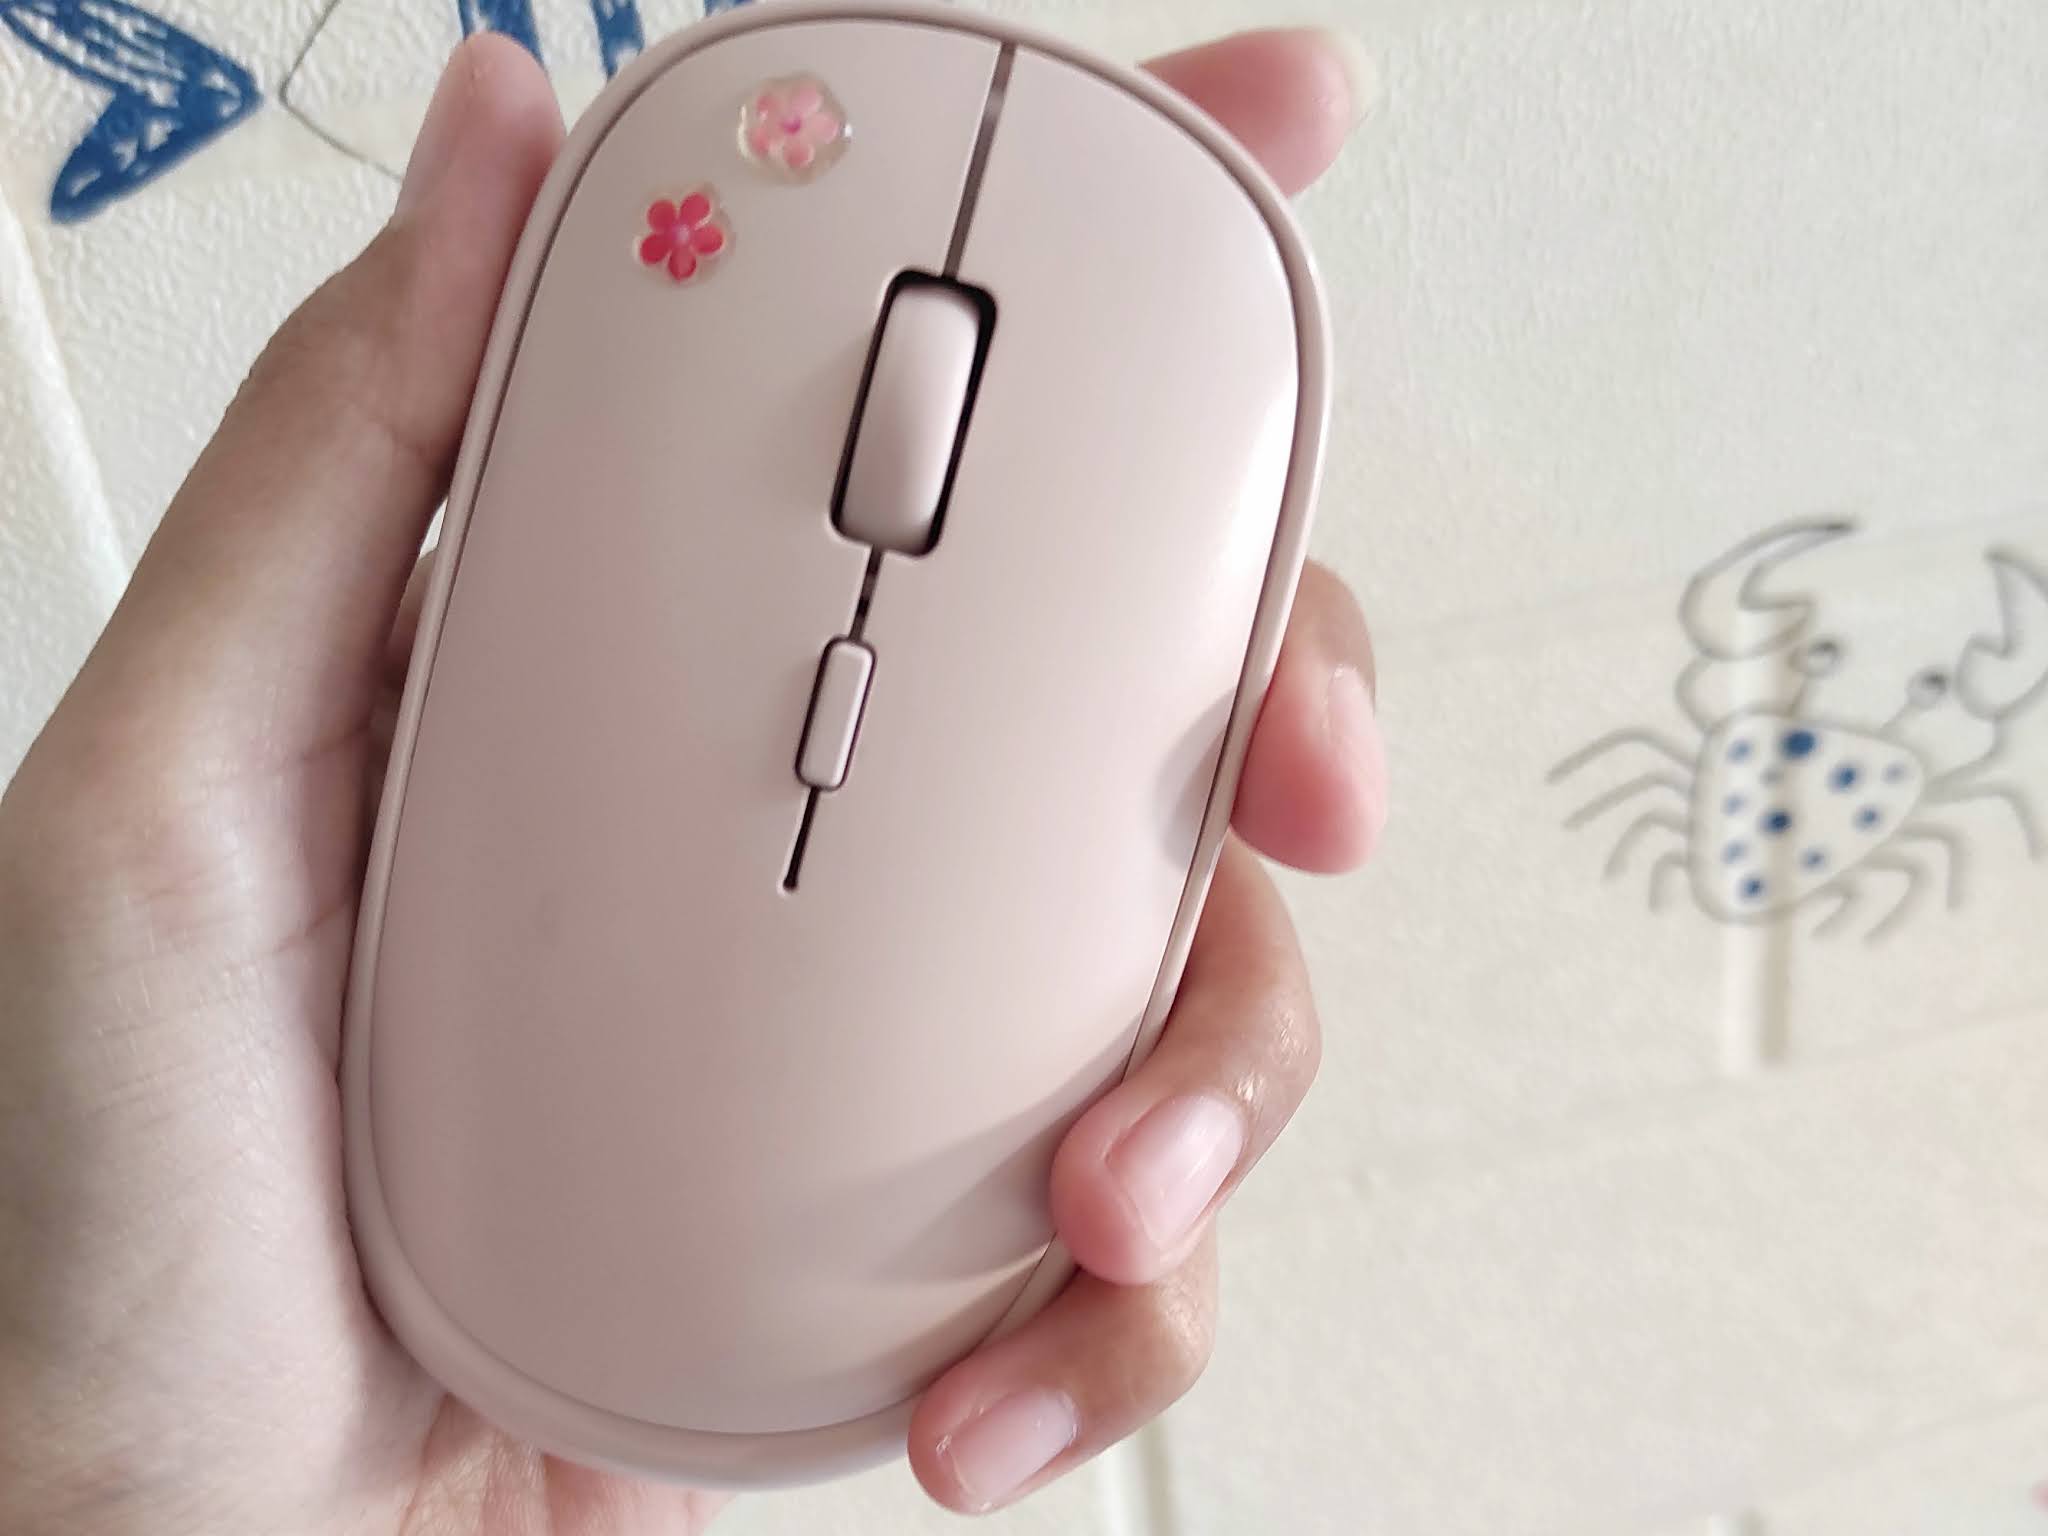 G2 mouse. Zero two Mouse Board.